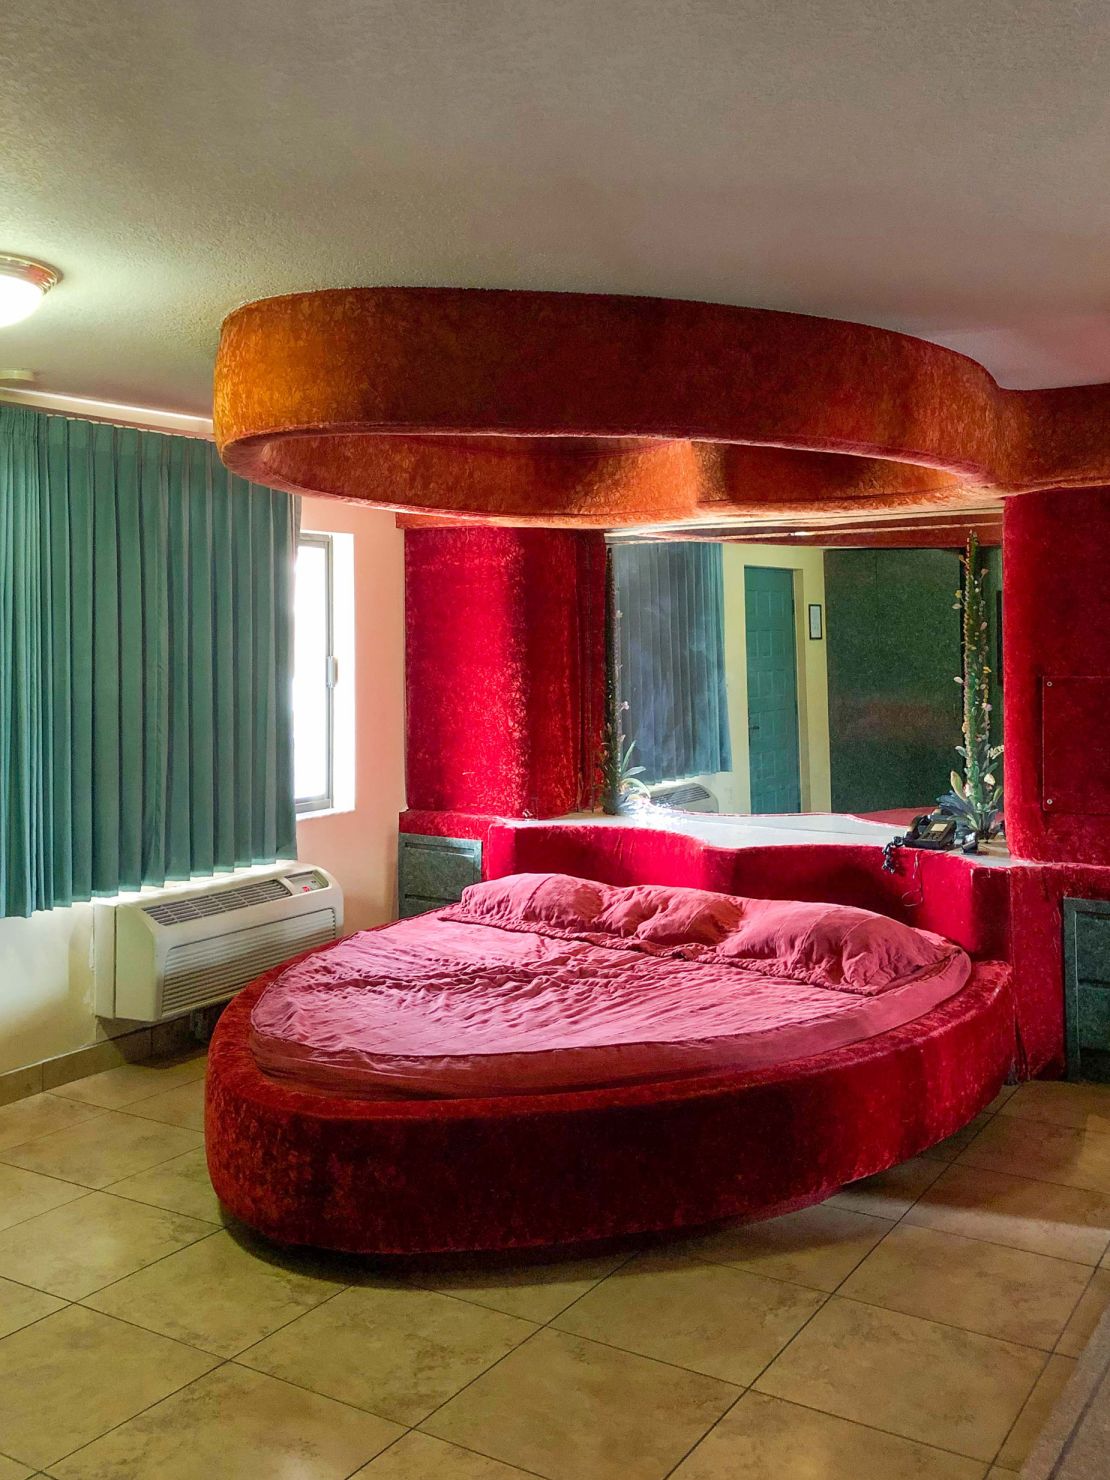 A heart-shaped bed at the Miami Princess Hotel in Miami, Florida.